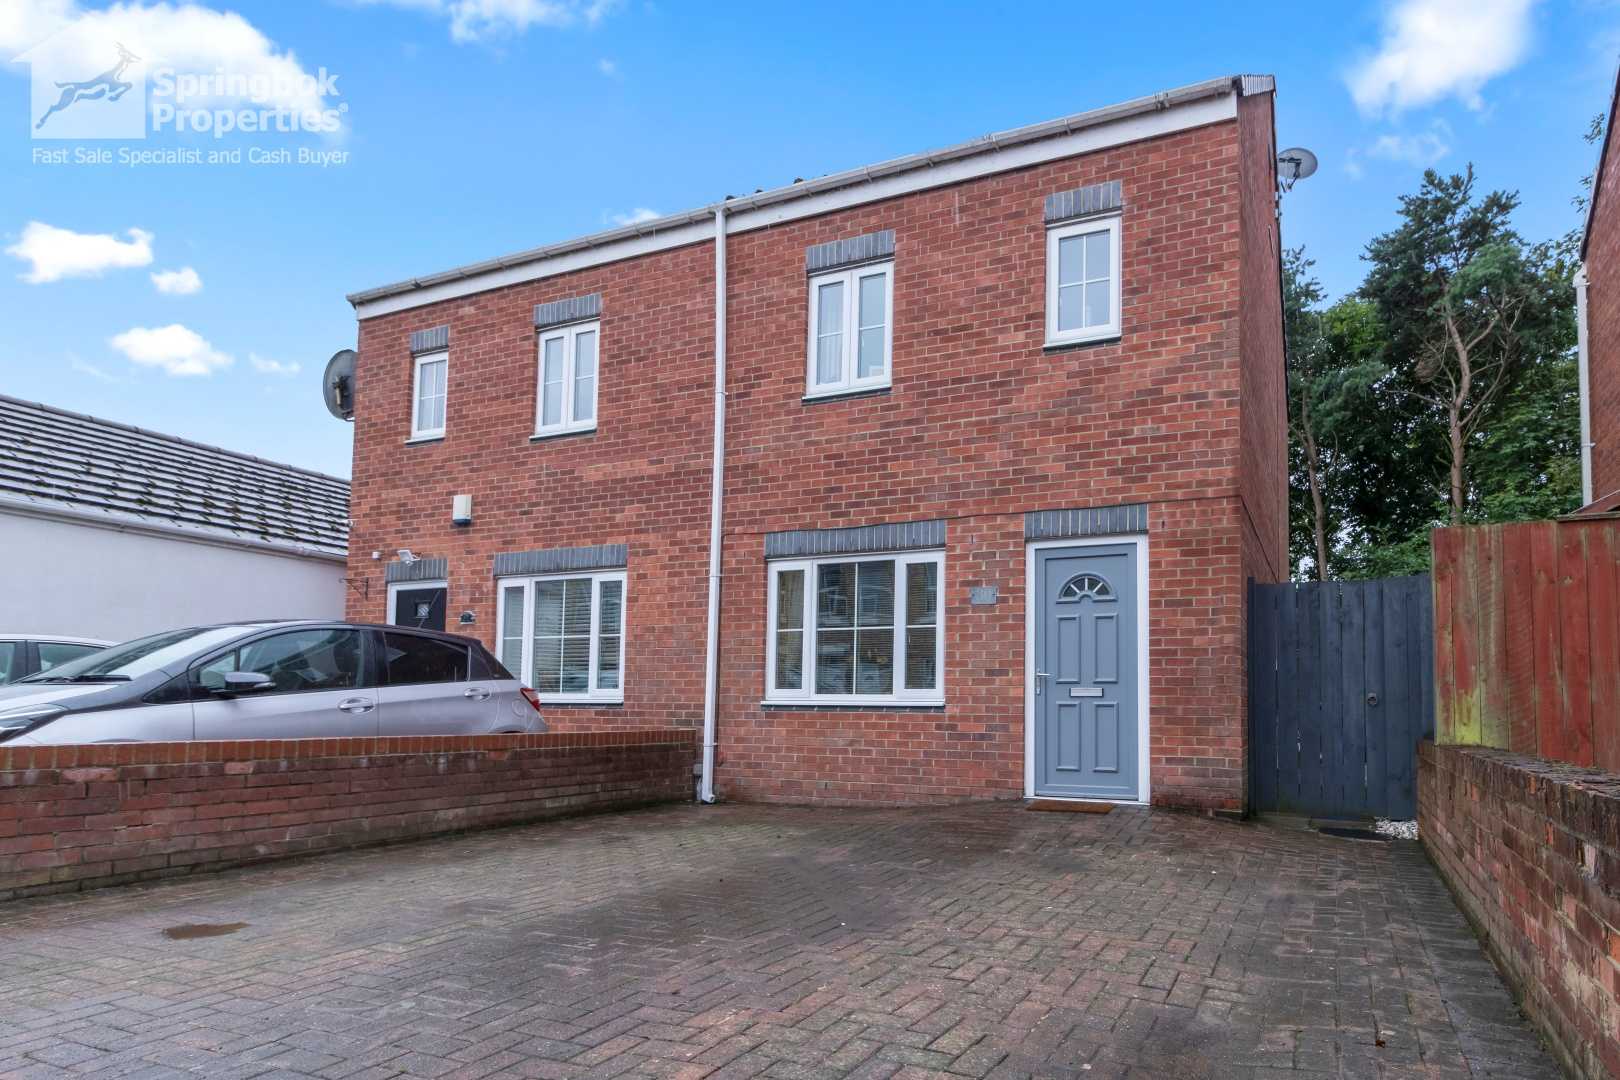 House in Seghill, North Tyneside 12088321